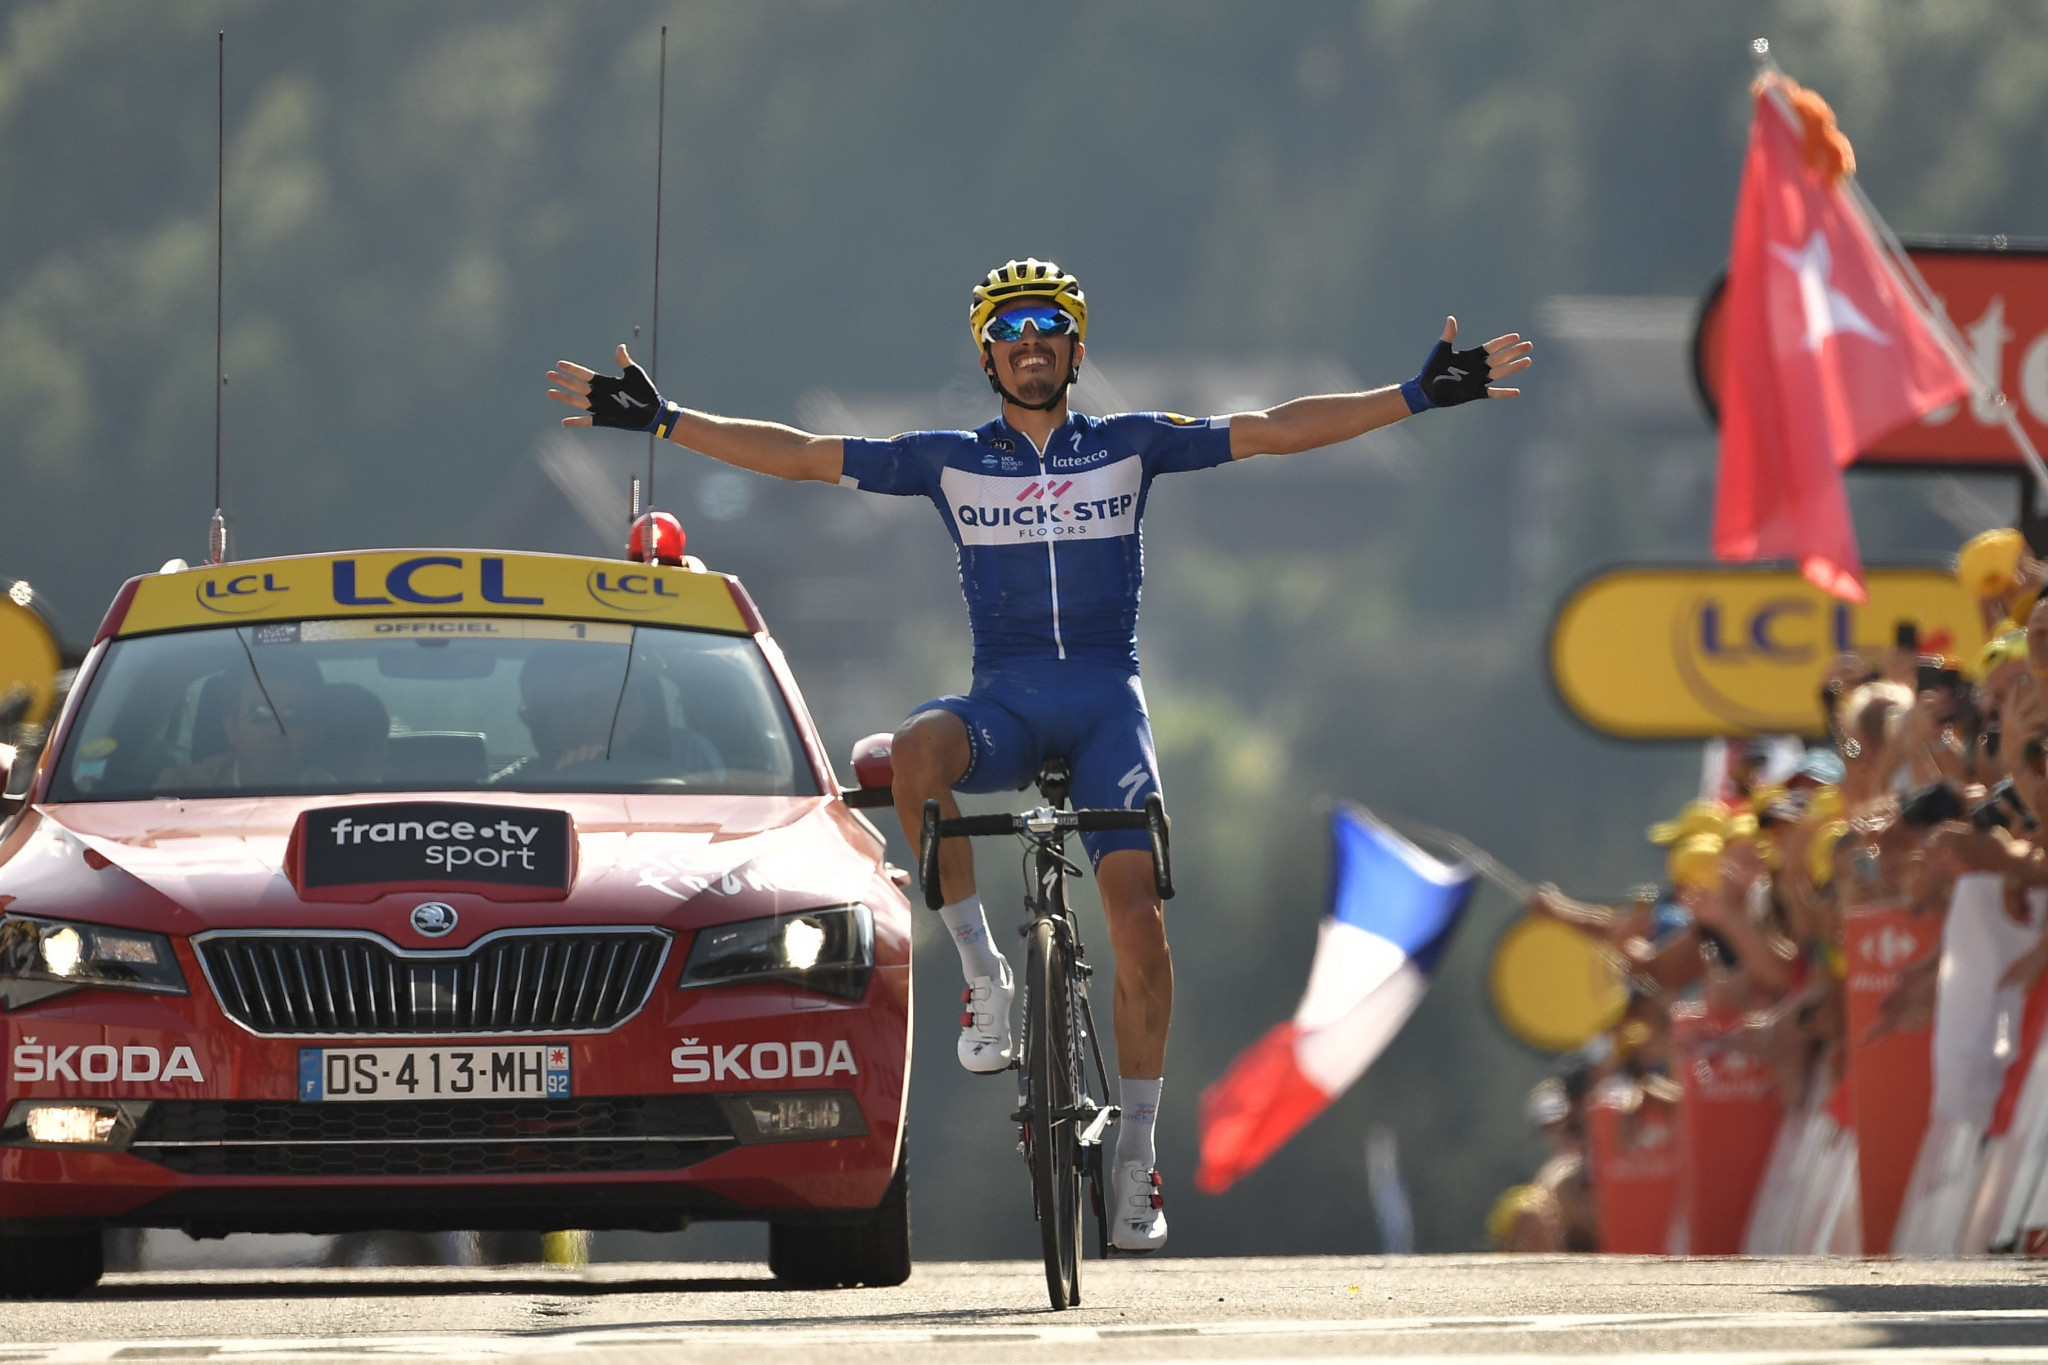 Alaphilippe solos to maiden Tour de France stage win as van Avermaet extends race lead